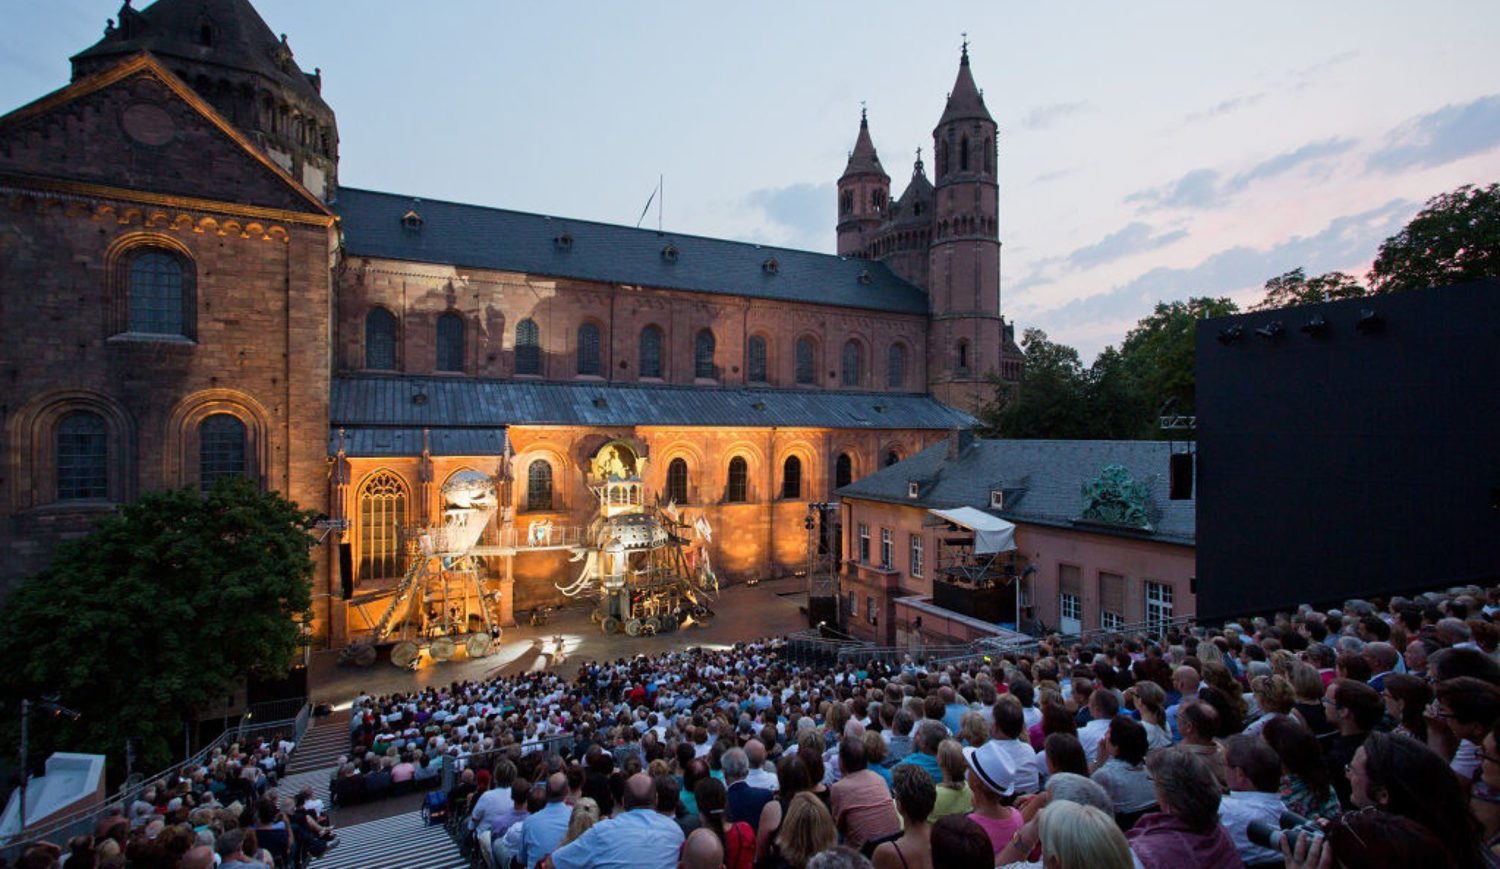 Nibelungen Festival in Worms at the Worms Cathedral